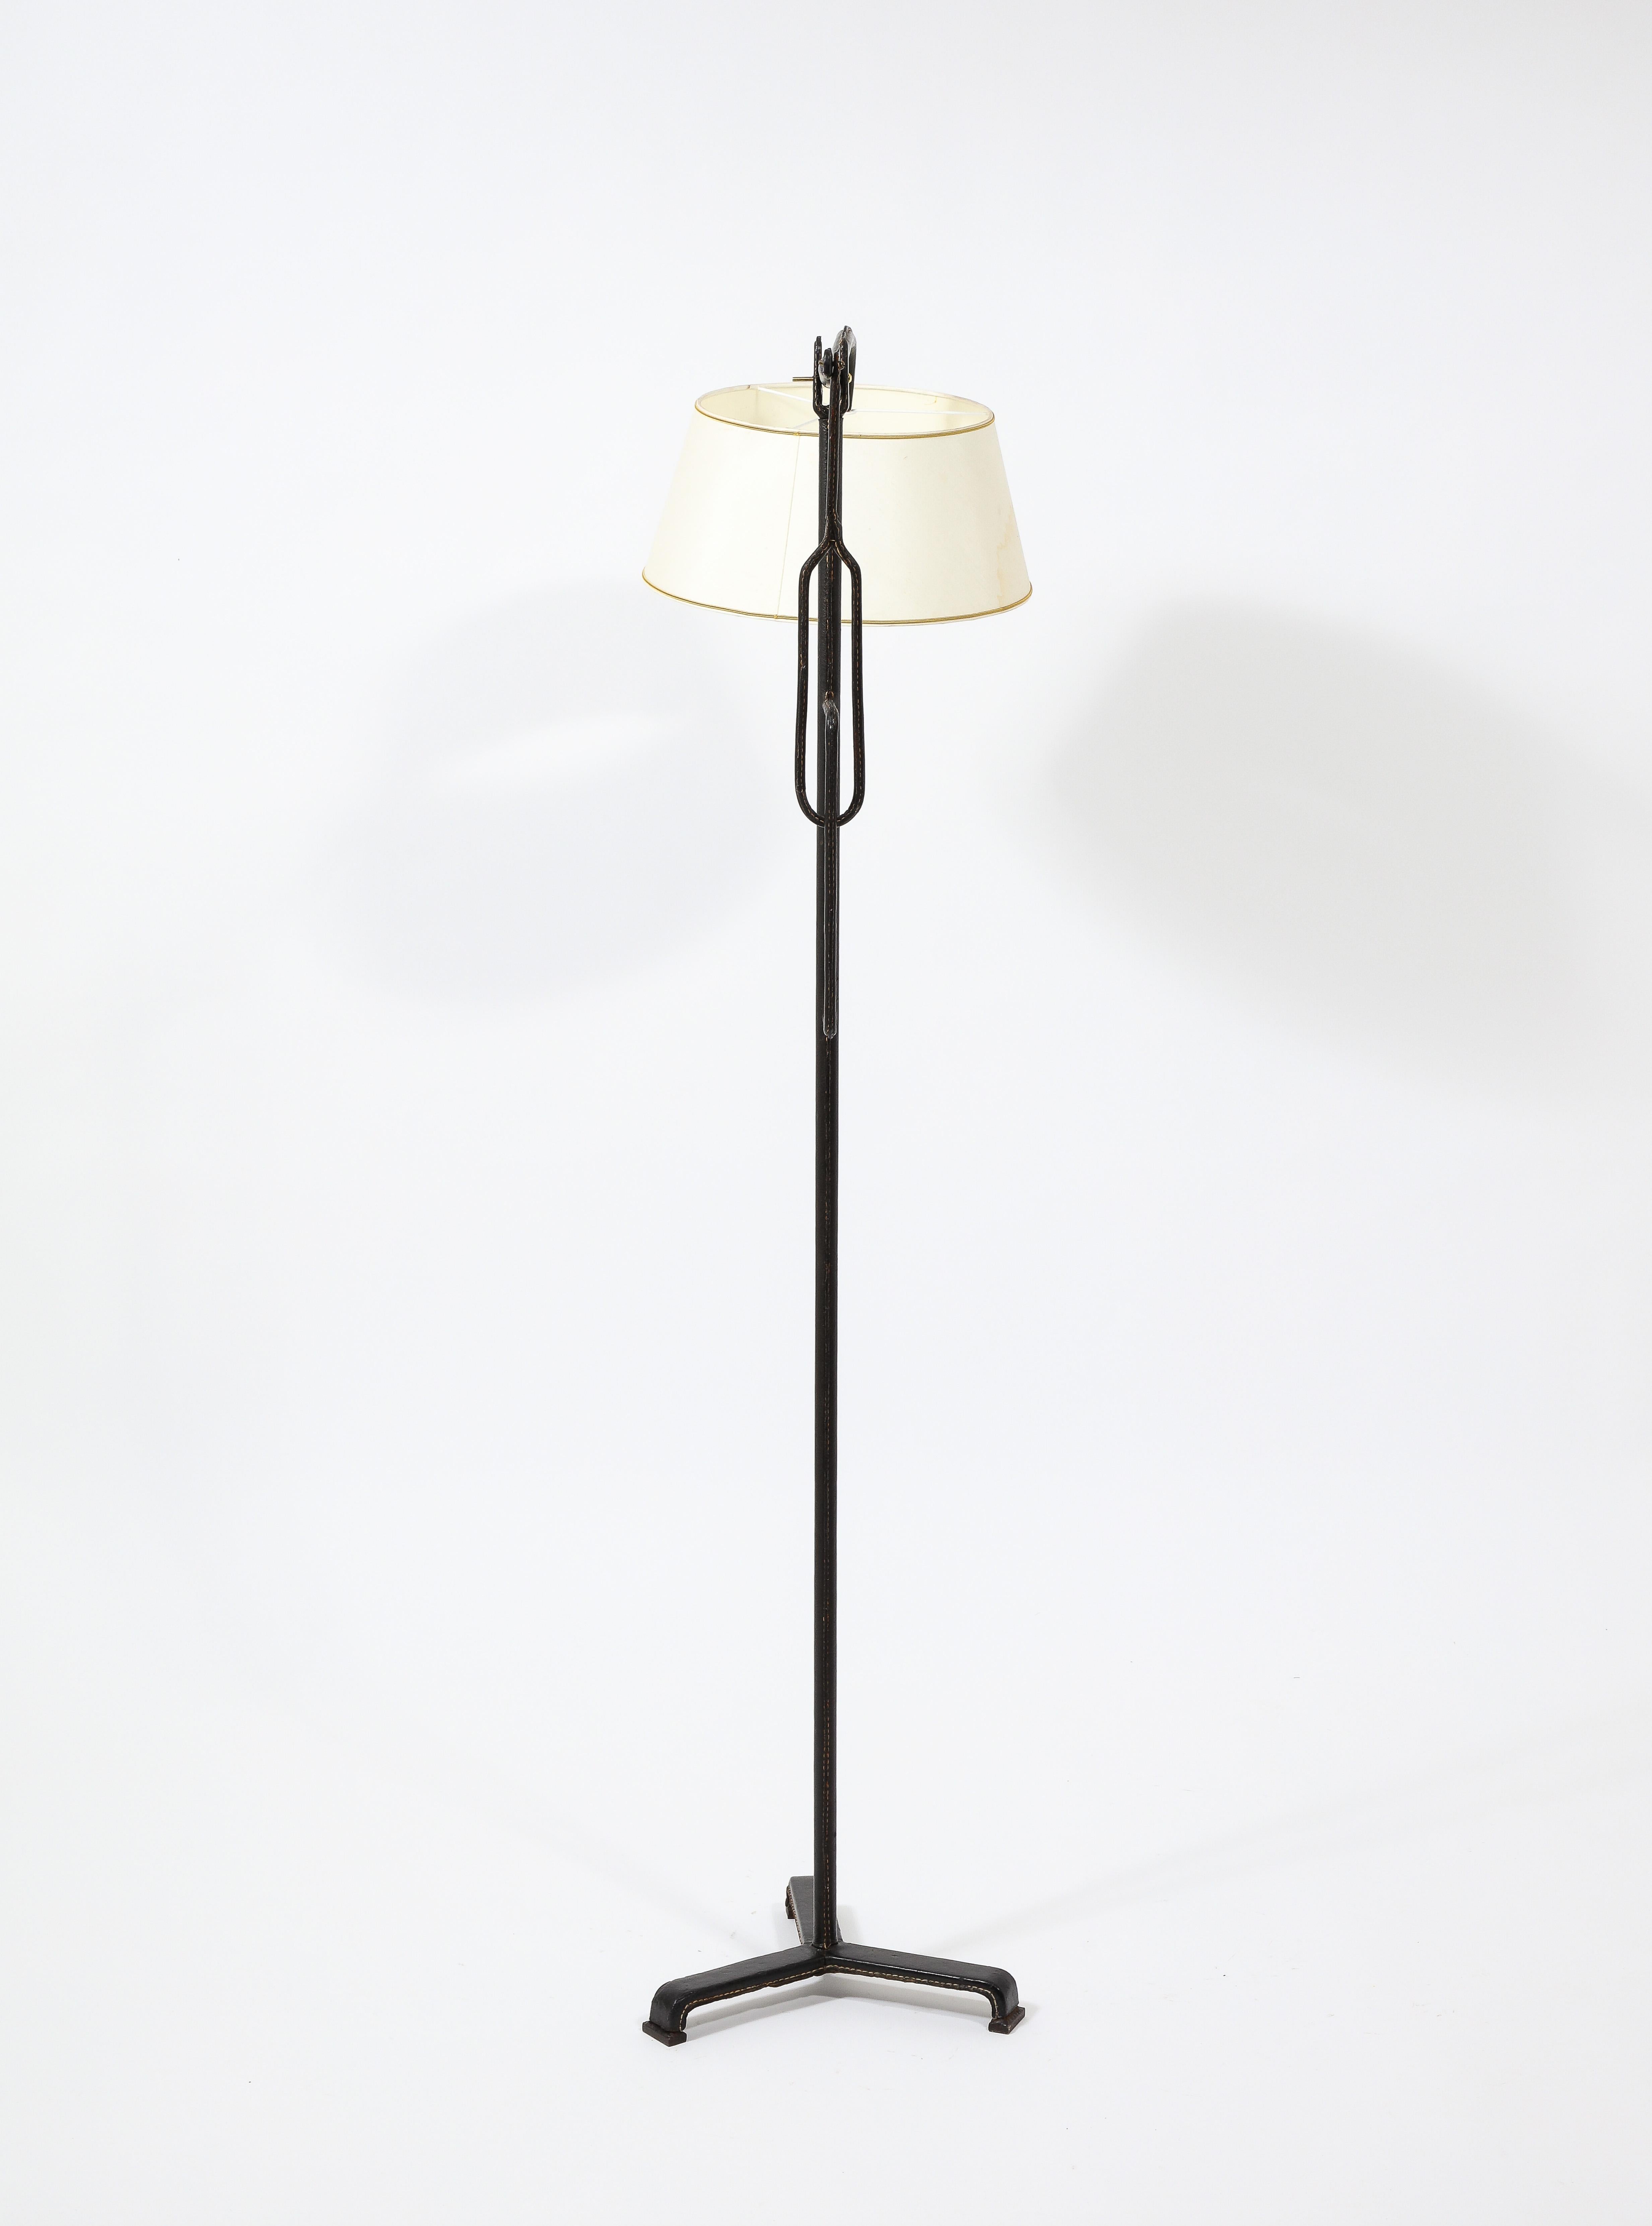 Jacques Adnet Black Leather Potence Floor Lamp, France 1940's For Sale 4